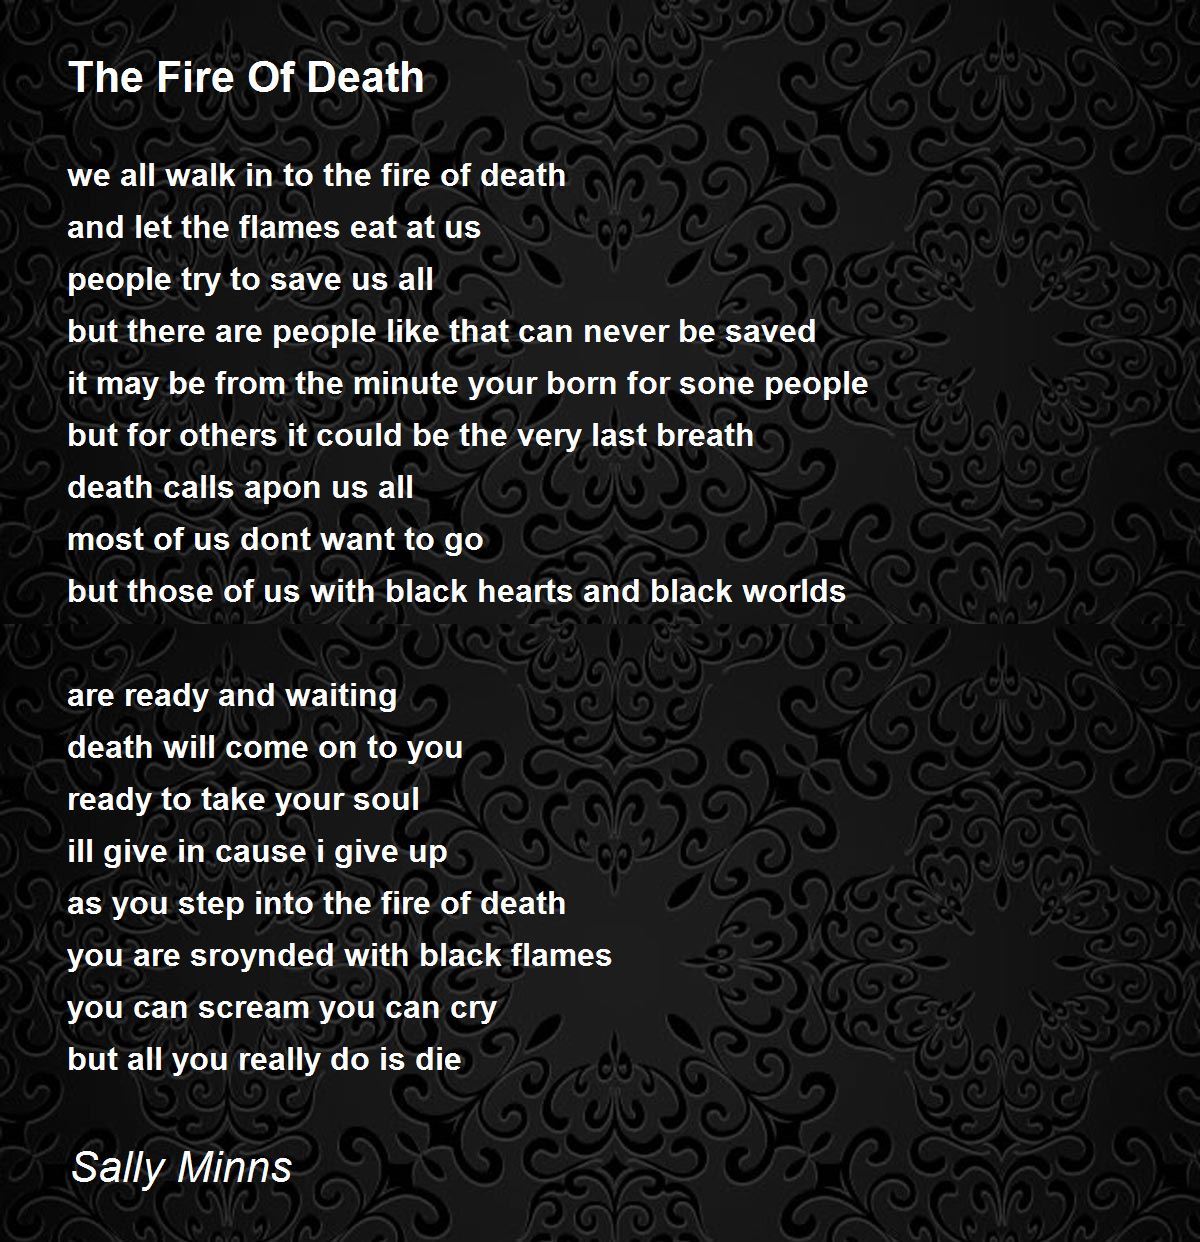 The Fire Of Death - The Fire Of Death Poem by Sally Minns